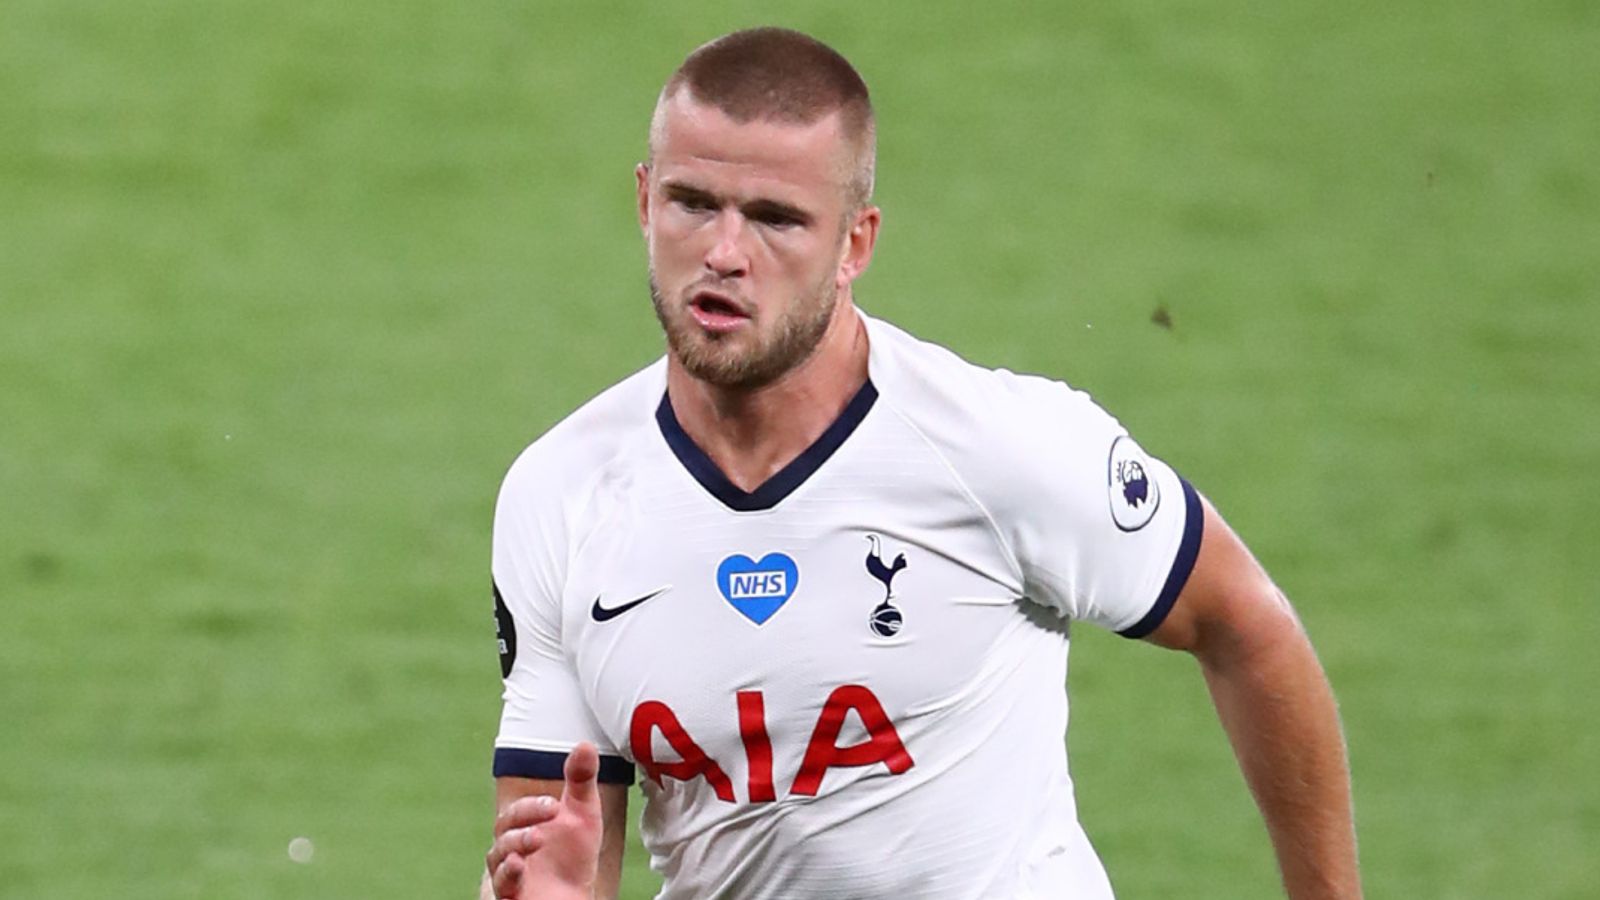  Eric Dier is playing for Tottenham in the Champions League semi-final against Ajax.